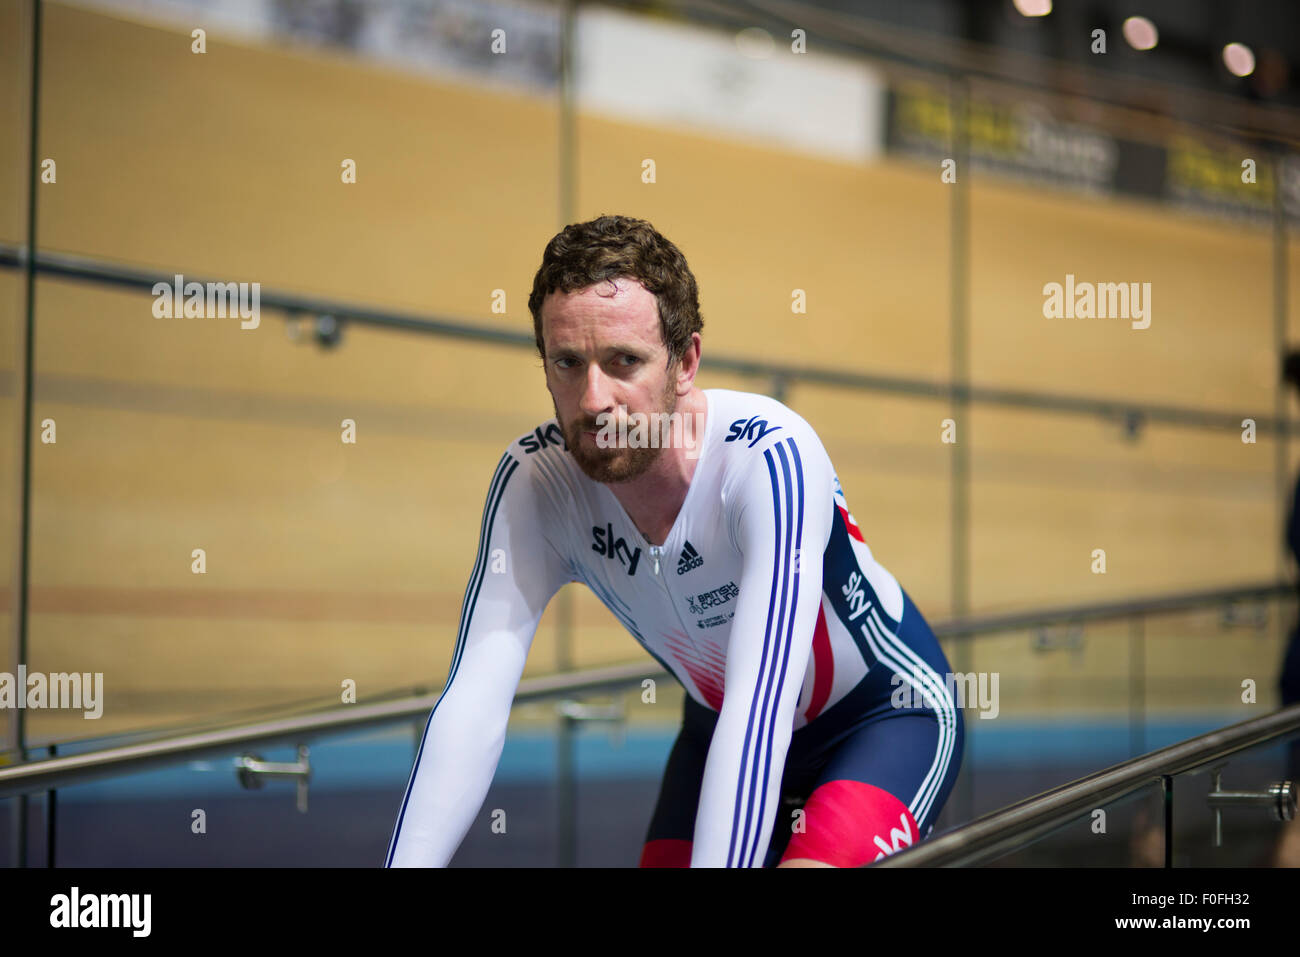 Sir Bradley Wiggins warms down after the team pursuit final at the Revolution Series at Derby Arena, Derby, United Kingdom on 14 August 2015. The Revolution Series is a professional track racing series featuring many of the world's best track cyclists. This event, taking place over 3 days from 14-16 August 2015, is an important preparation event for the Rio 2016 Olympic Games, allowing British riders to score qualifying points for the Games. Stock Photo